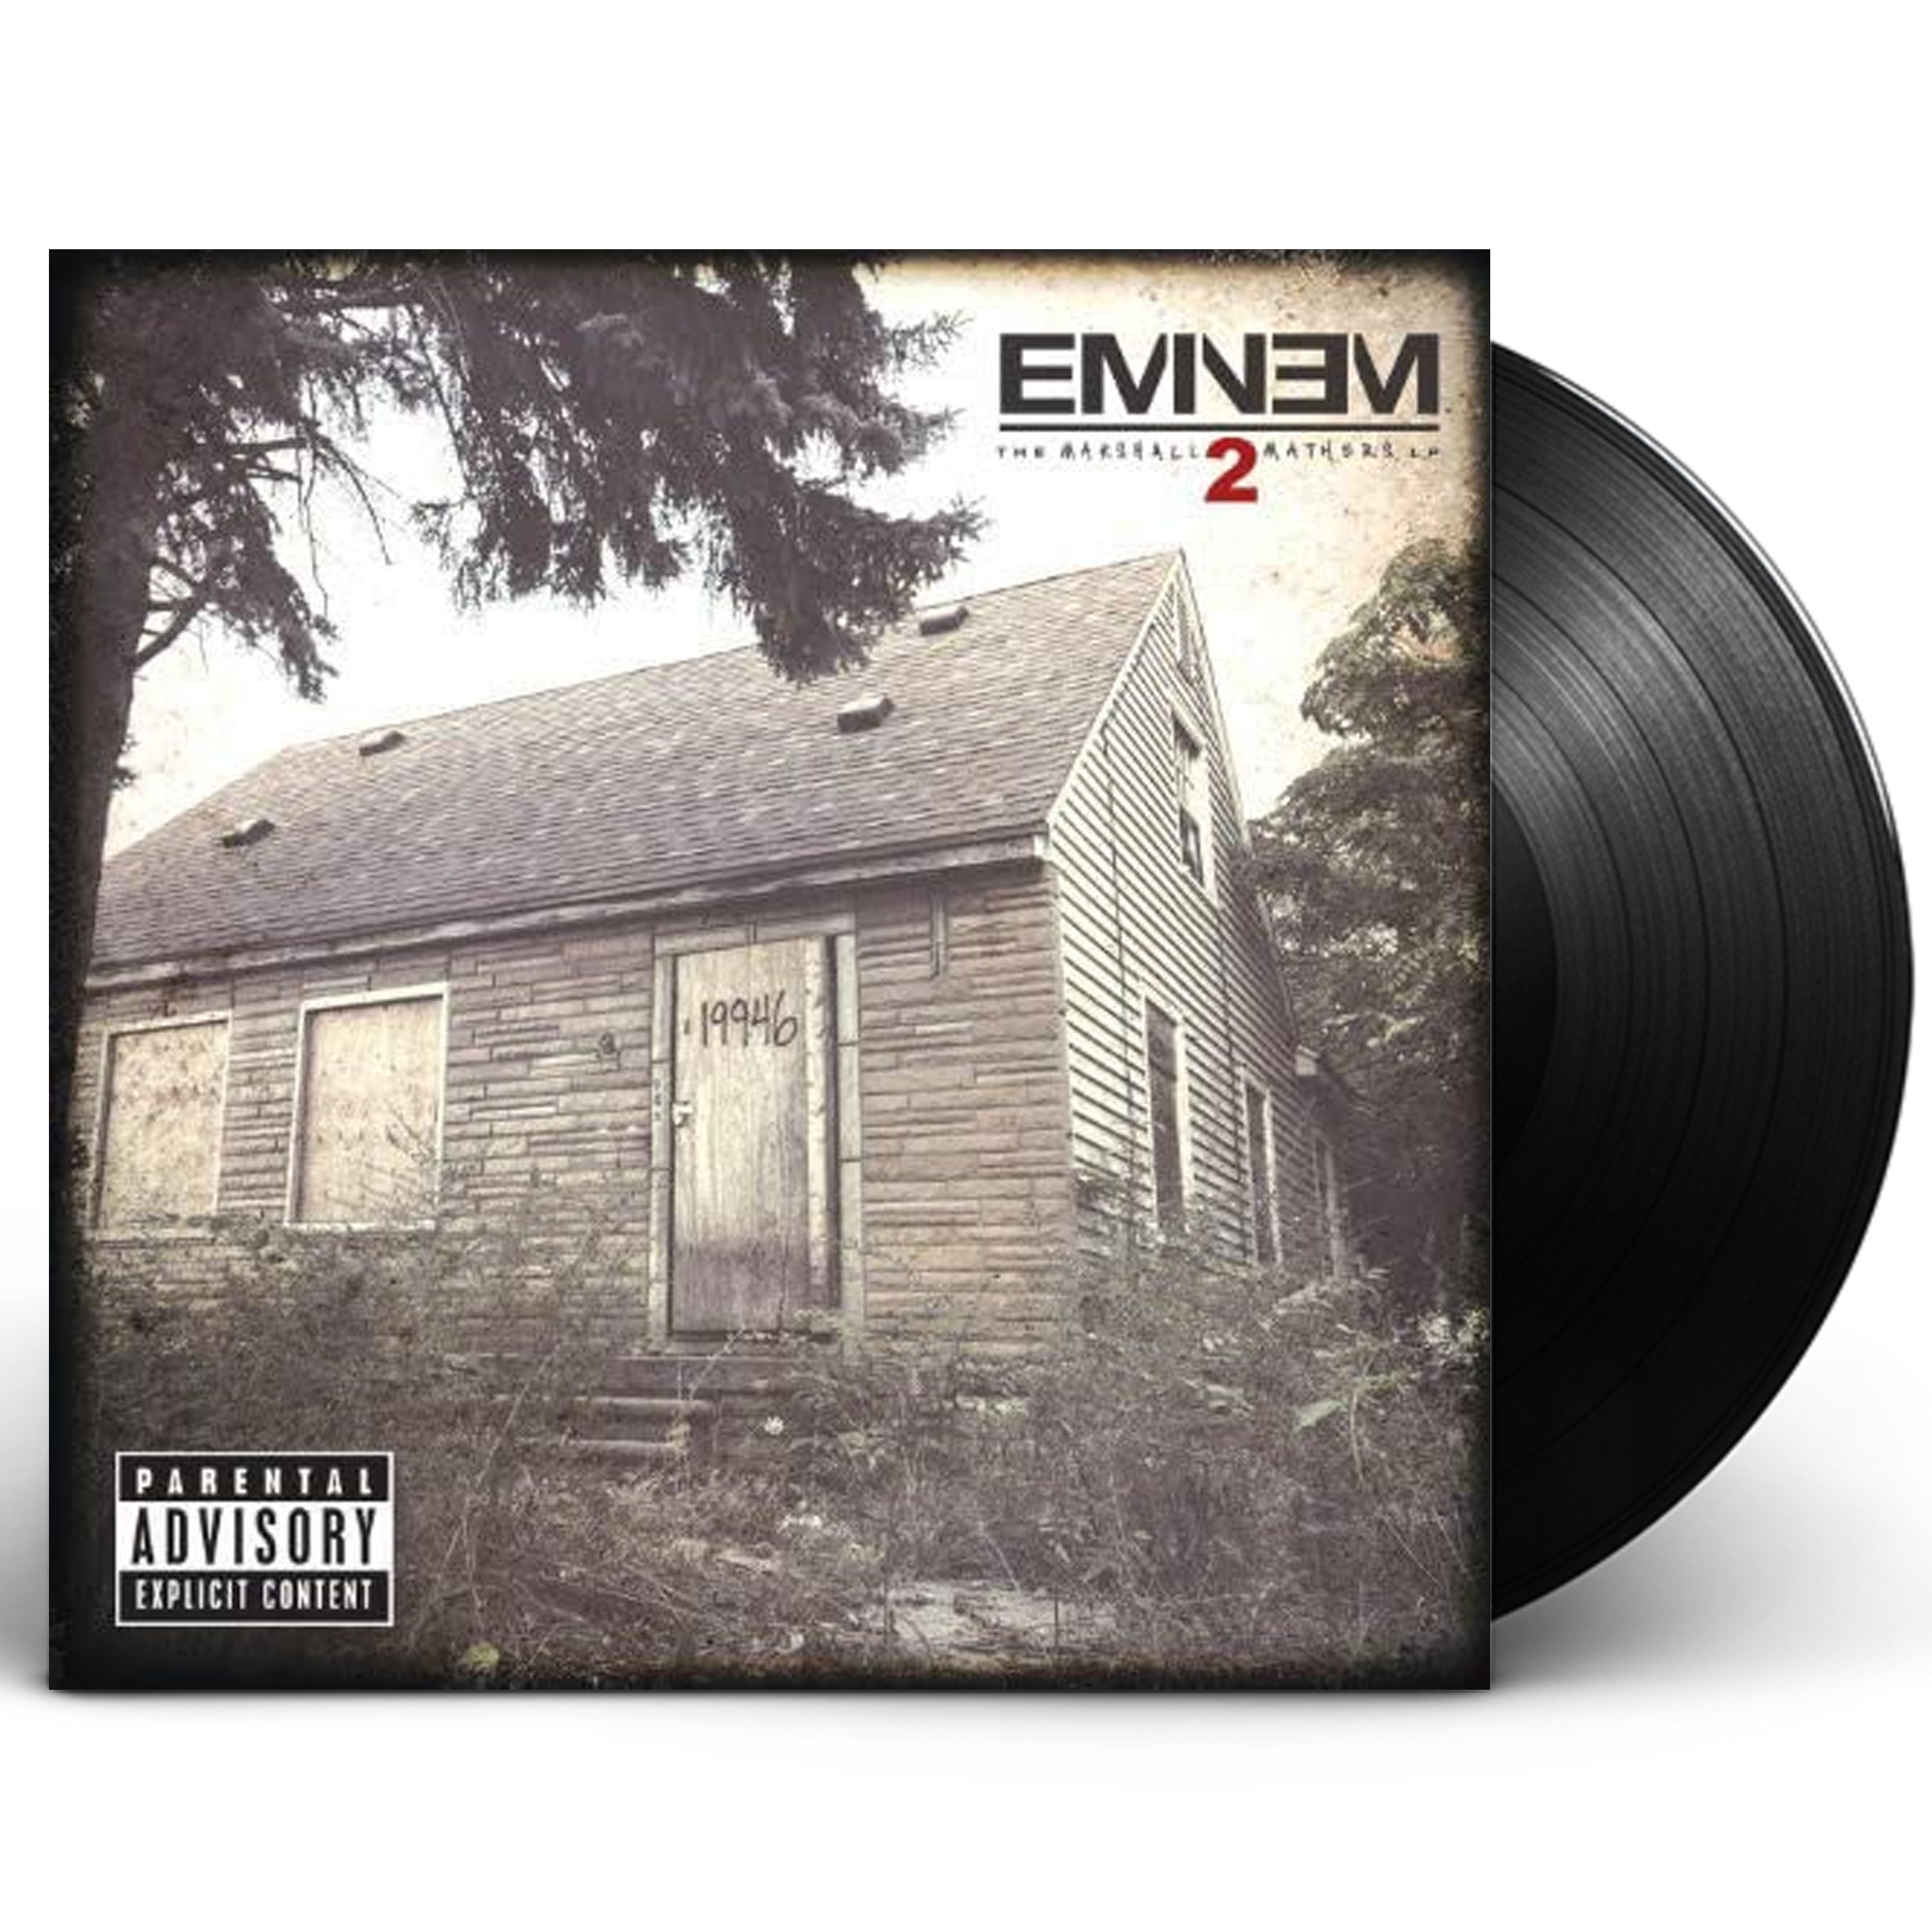 Eminem's very first and extremely rare vinyl album will be